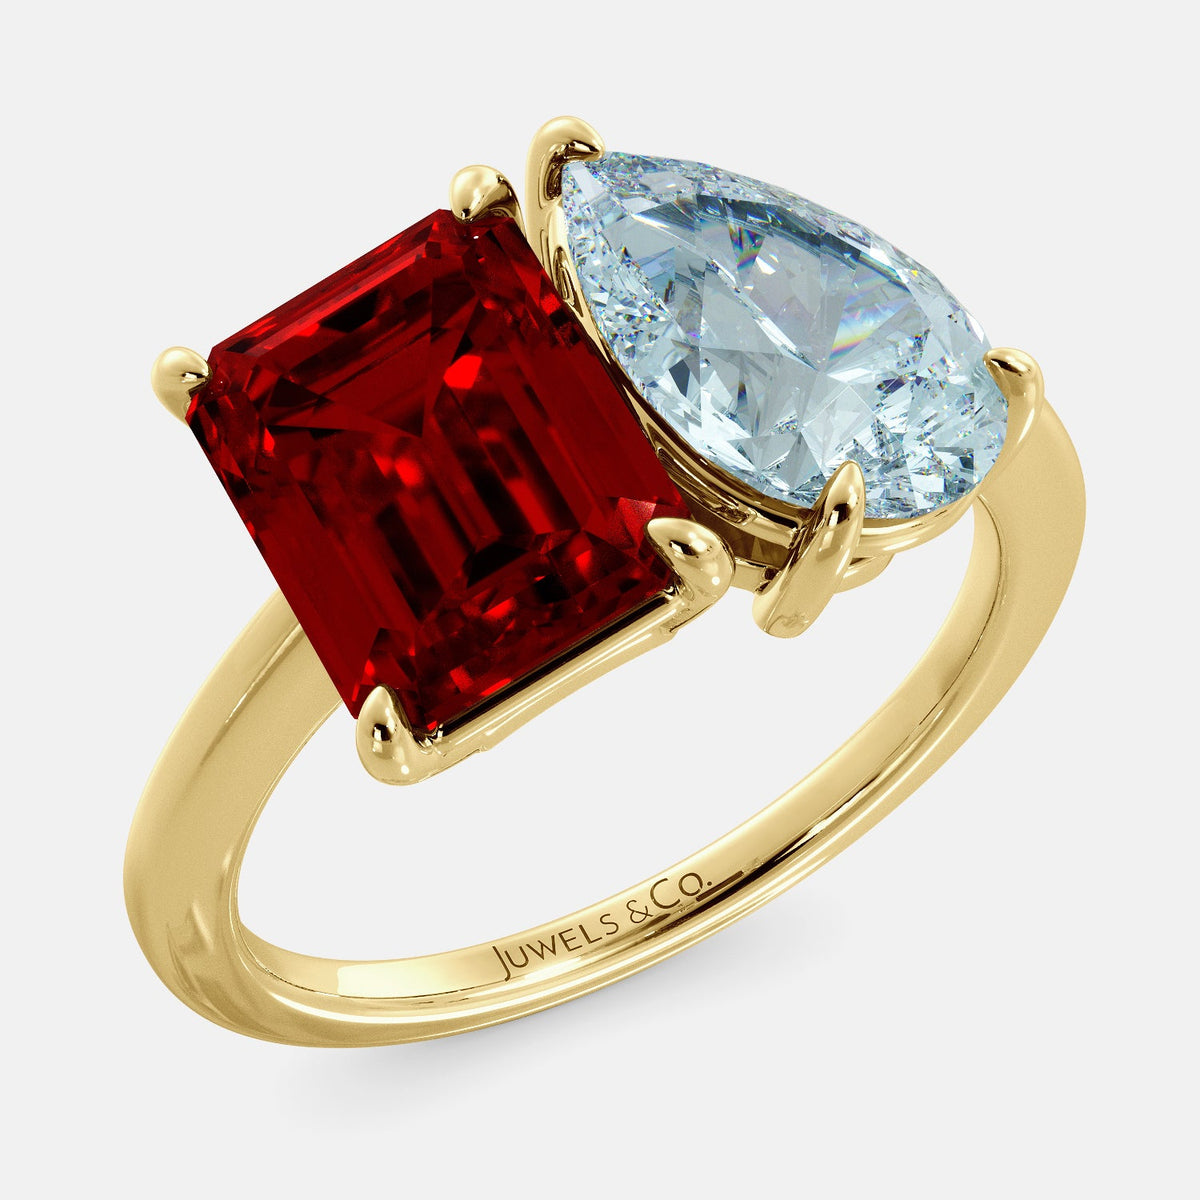 A toi et moi ring with an emerald-cut ruby and a pear-cut gemstone. The emerald-cut morganite is set on the left of the ring, and the pear-cut gemstone is set on the right. The ring is made of recycled yellow gold and has a simple, elegant design. The pear-cut gemstone can be customized. **Here are some additional details about the image:** * The emerald-cut white ruby is a birthstone for July. * The pear-cut gemstone can be customized to any stone of your choice.